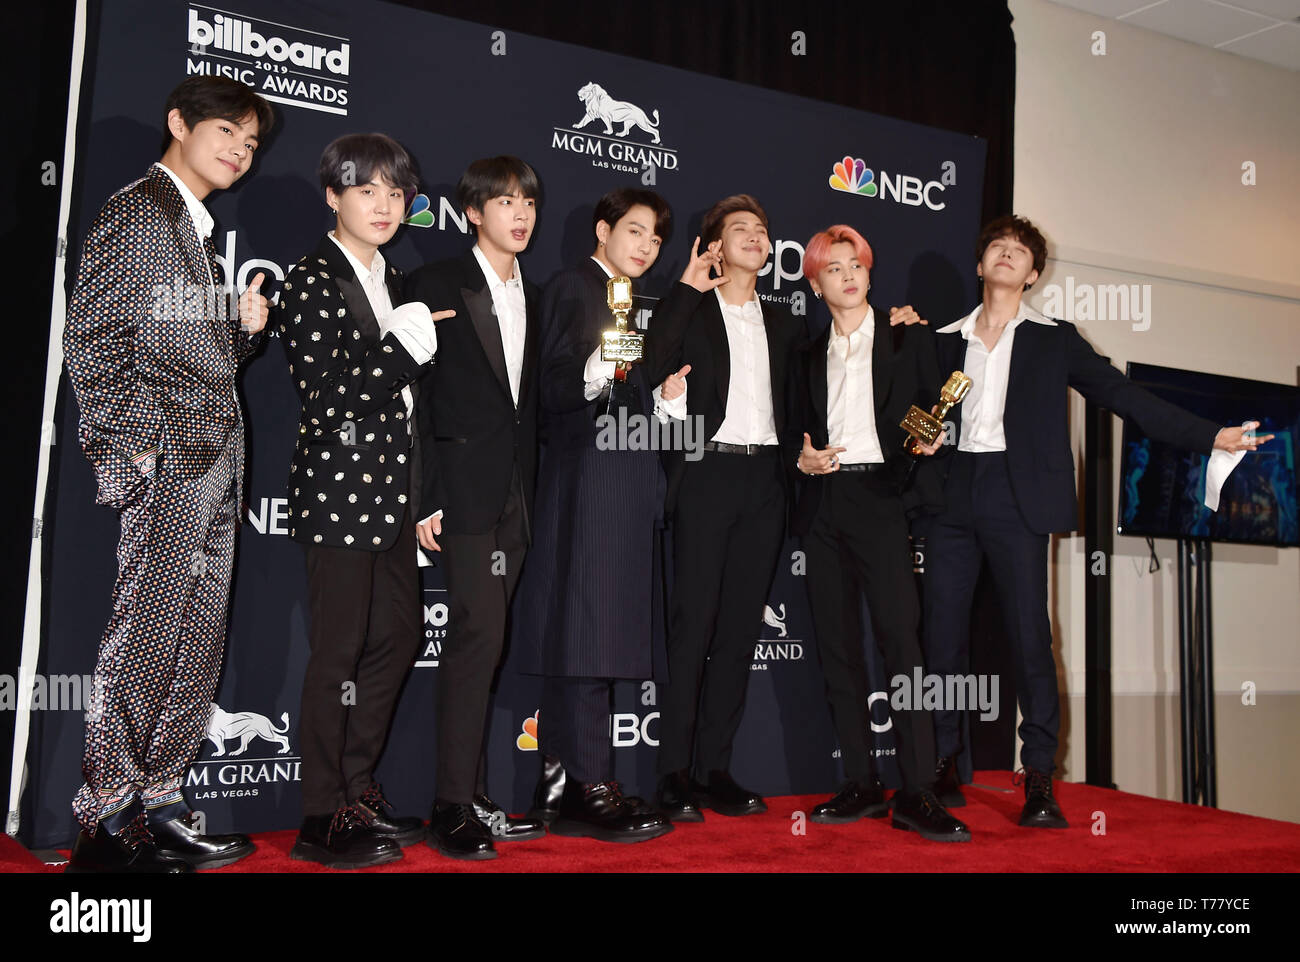 LAS VEGAS, NV - MAY 01: (L-R) V, Suga, Jin, Jungkook, RM, Jimin and J-Hope of BTS pose with the awards for Top Duo Group and Top Social Artist in the press room during the 2019 Billboard Music Awards at MGM Grand Garden Arena on May 01, 2019 in Las Vegas, Nevada. Stock Photo